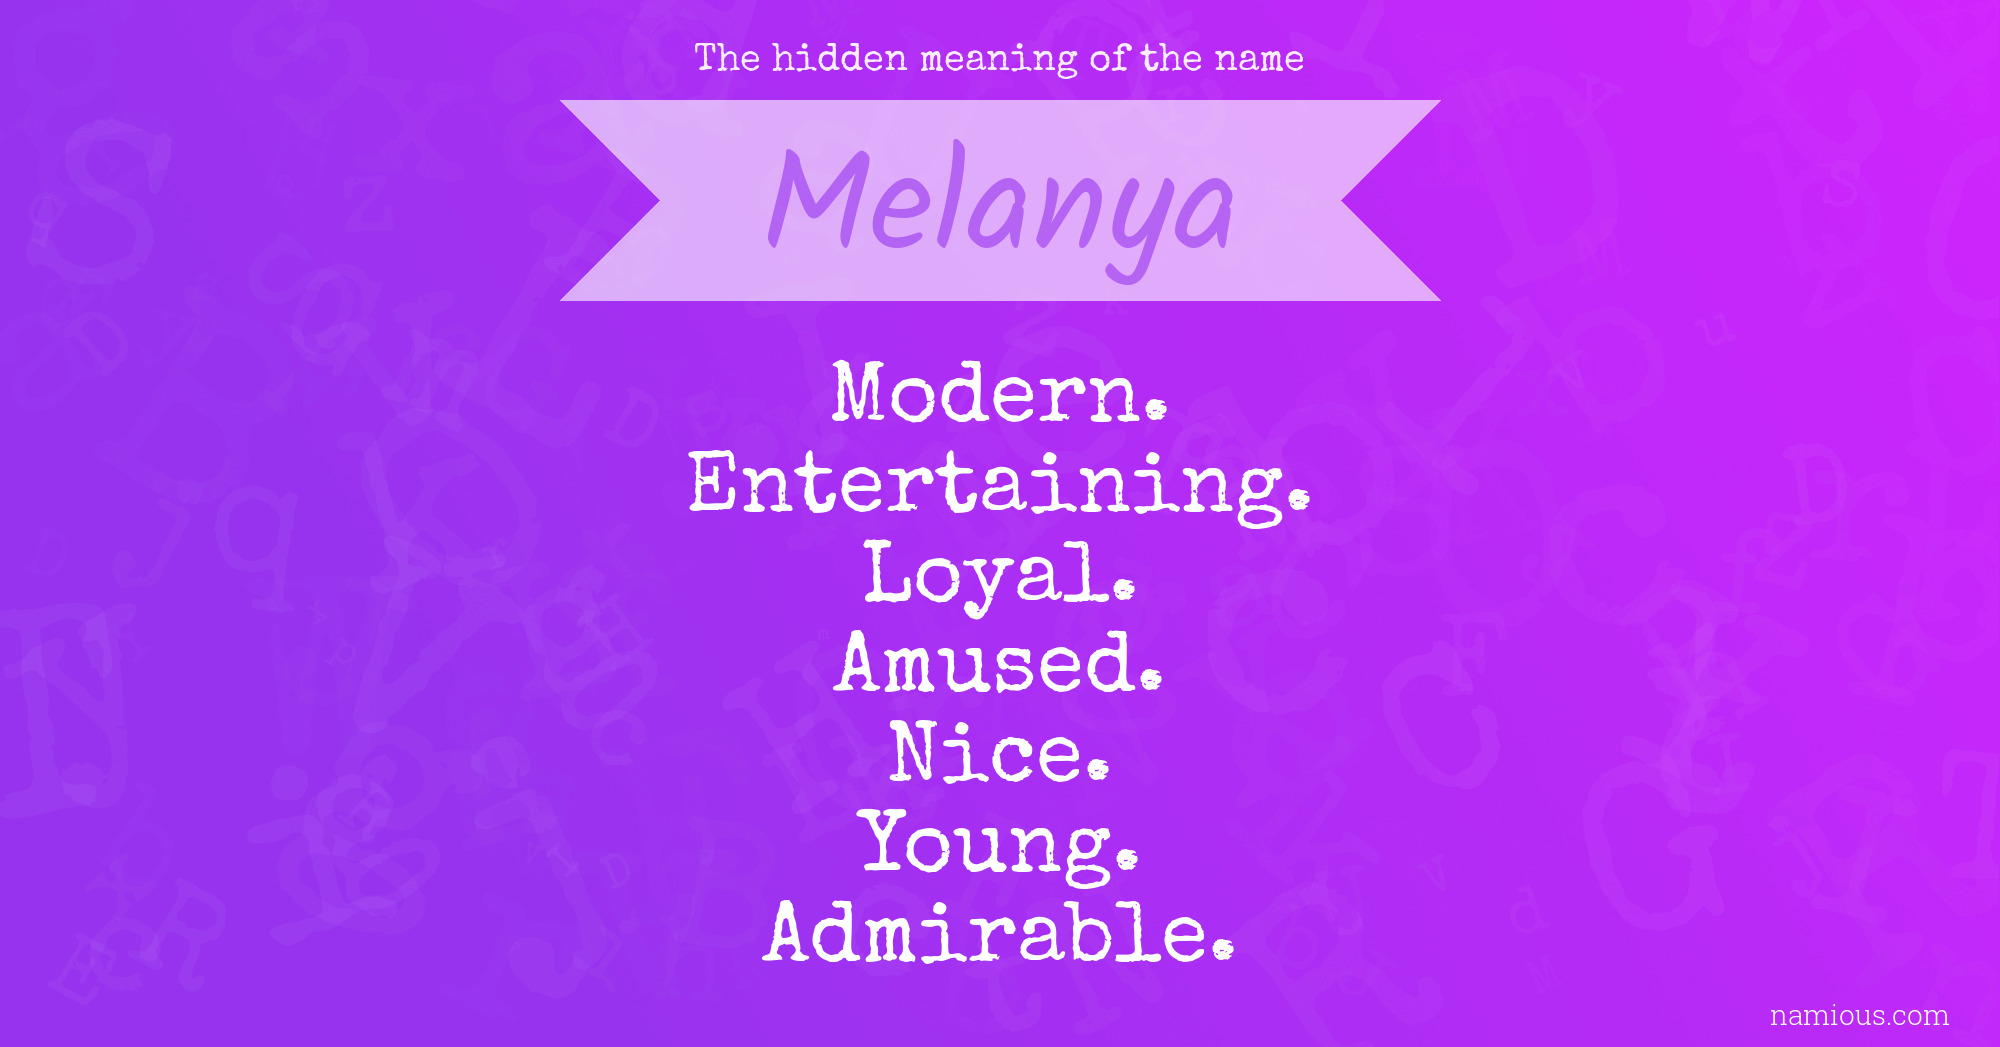 The hidden meaning of the name Melanya